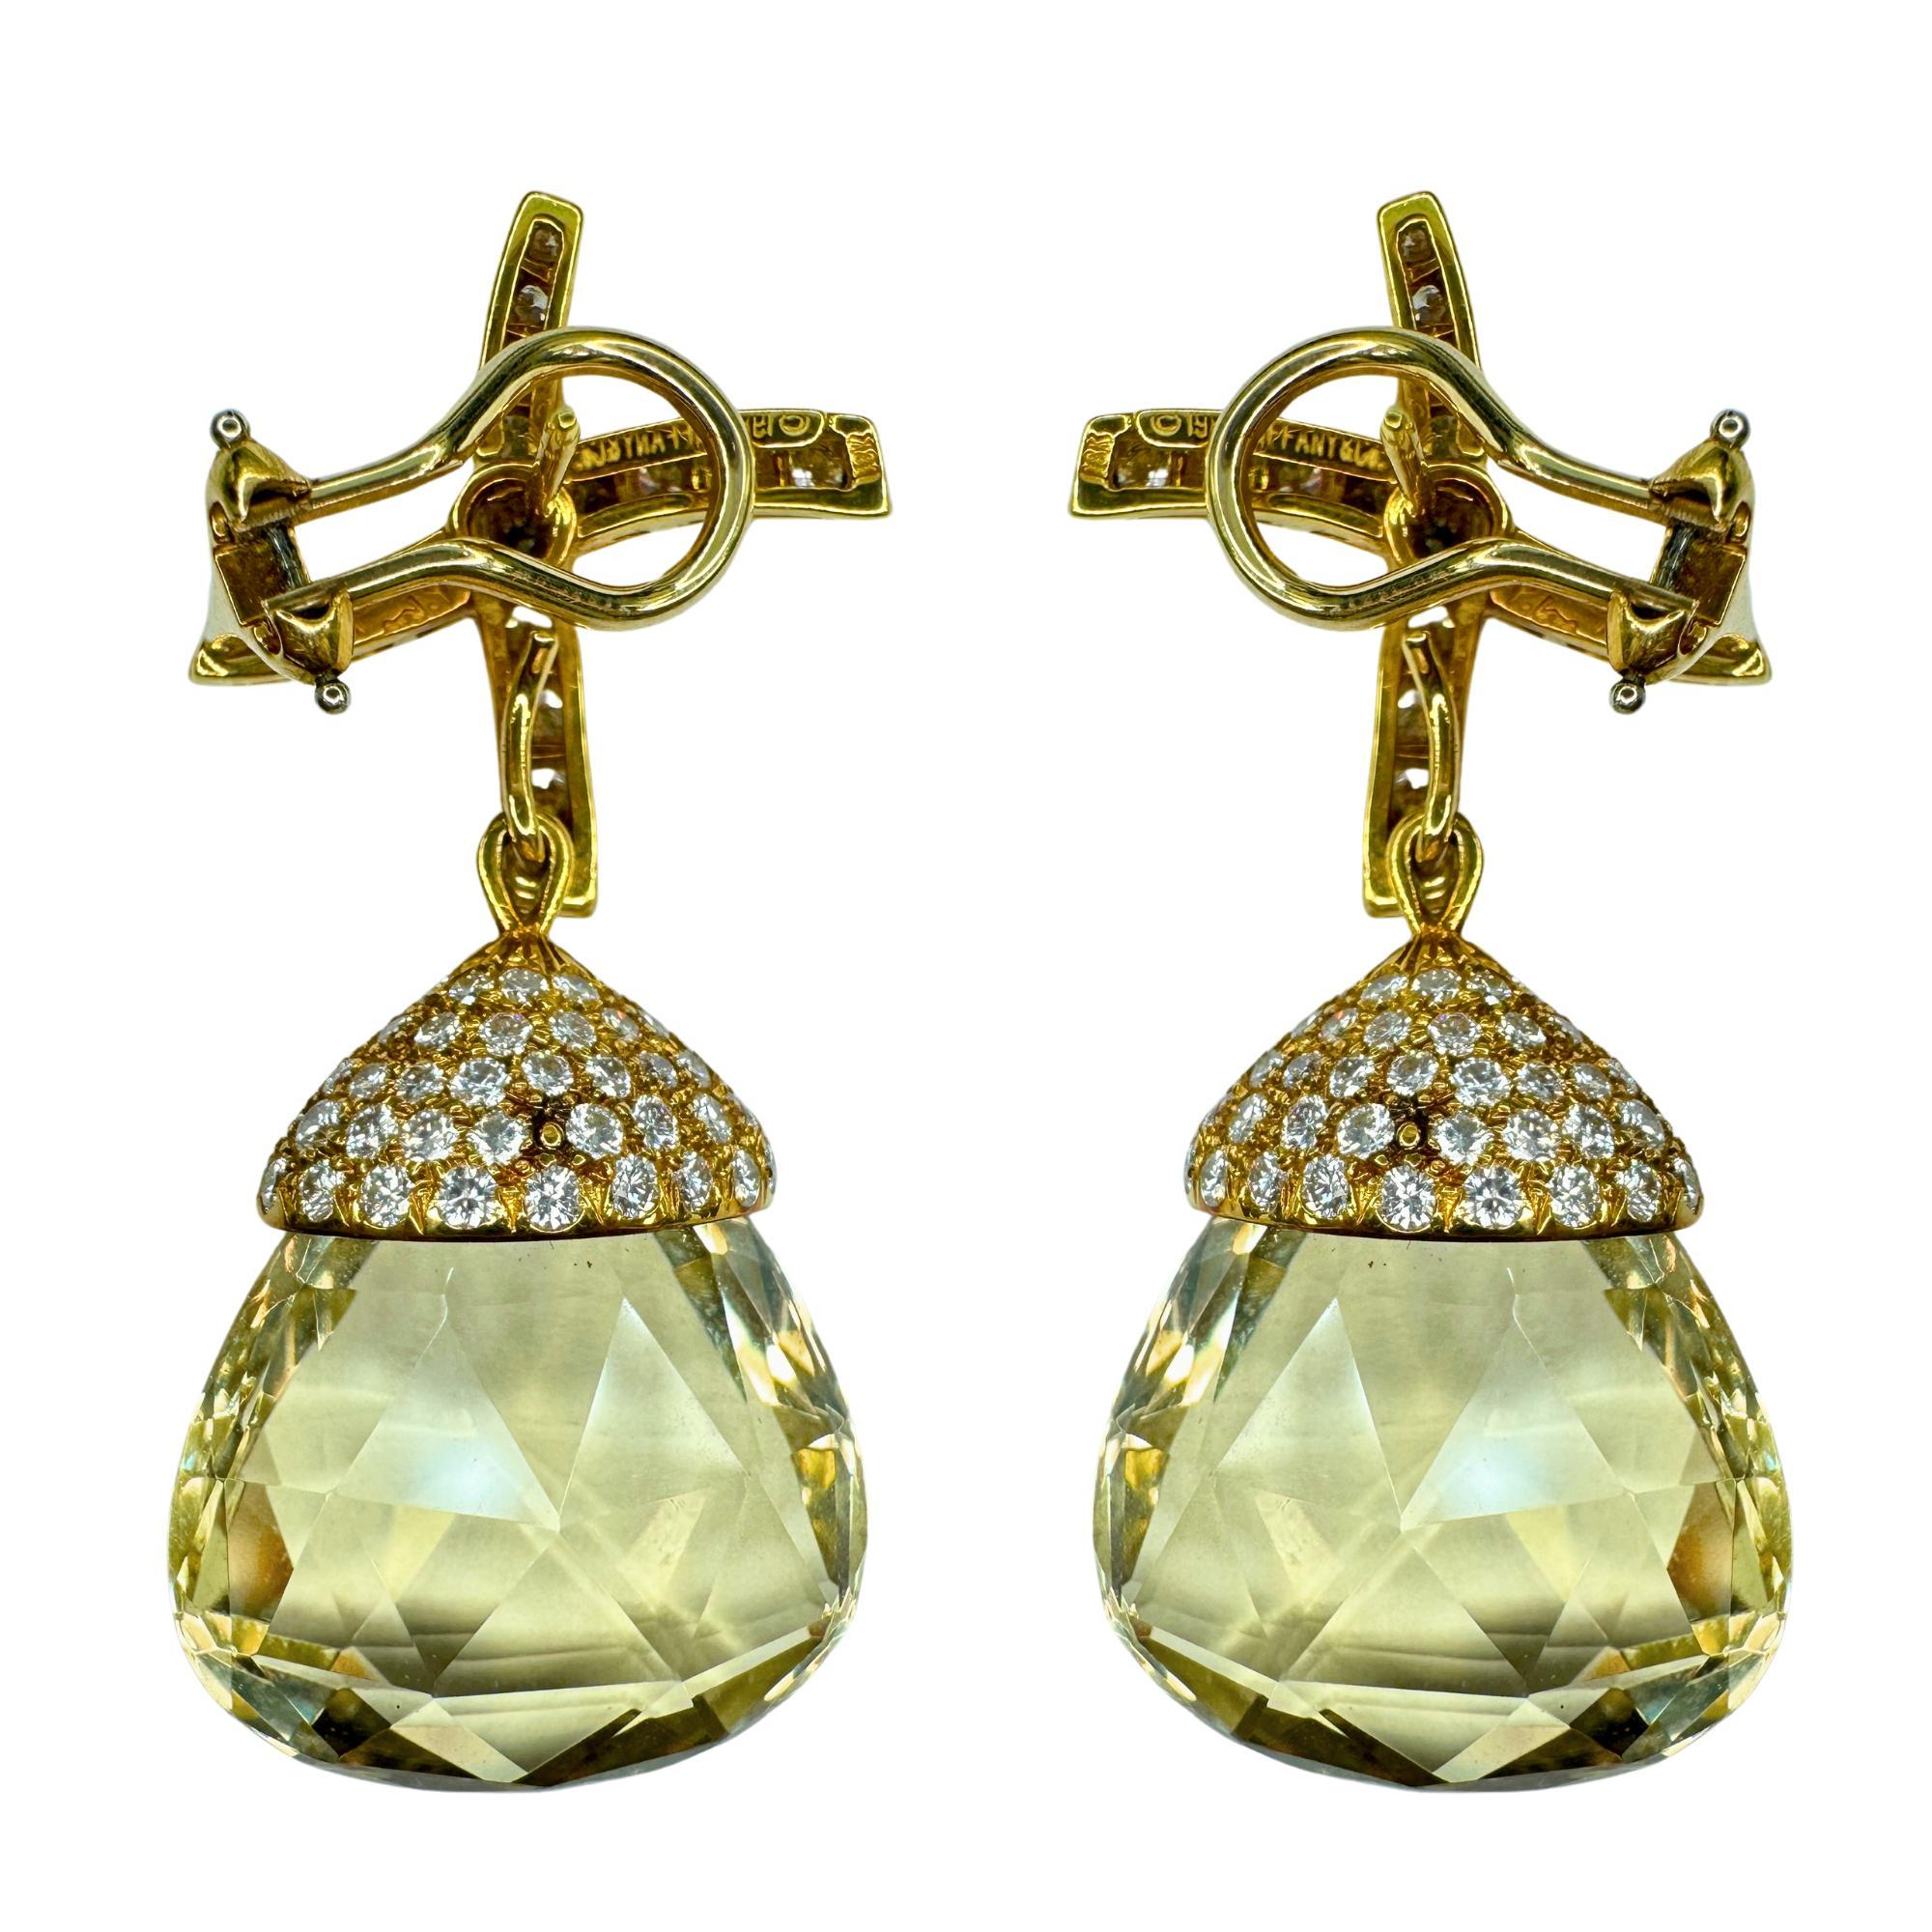 Add timeless elegance and sophistication to your look with these stunning 18k 1980's Tiffany & Co. Day-Night earrings, designed and signed by Paloma Picasso. The dazzling combination of diamonds and lemon citrine stones is sure to turn heads, while